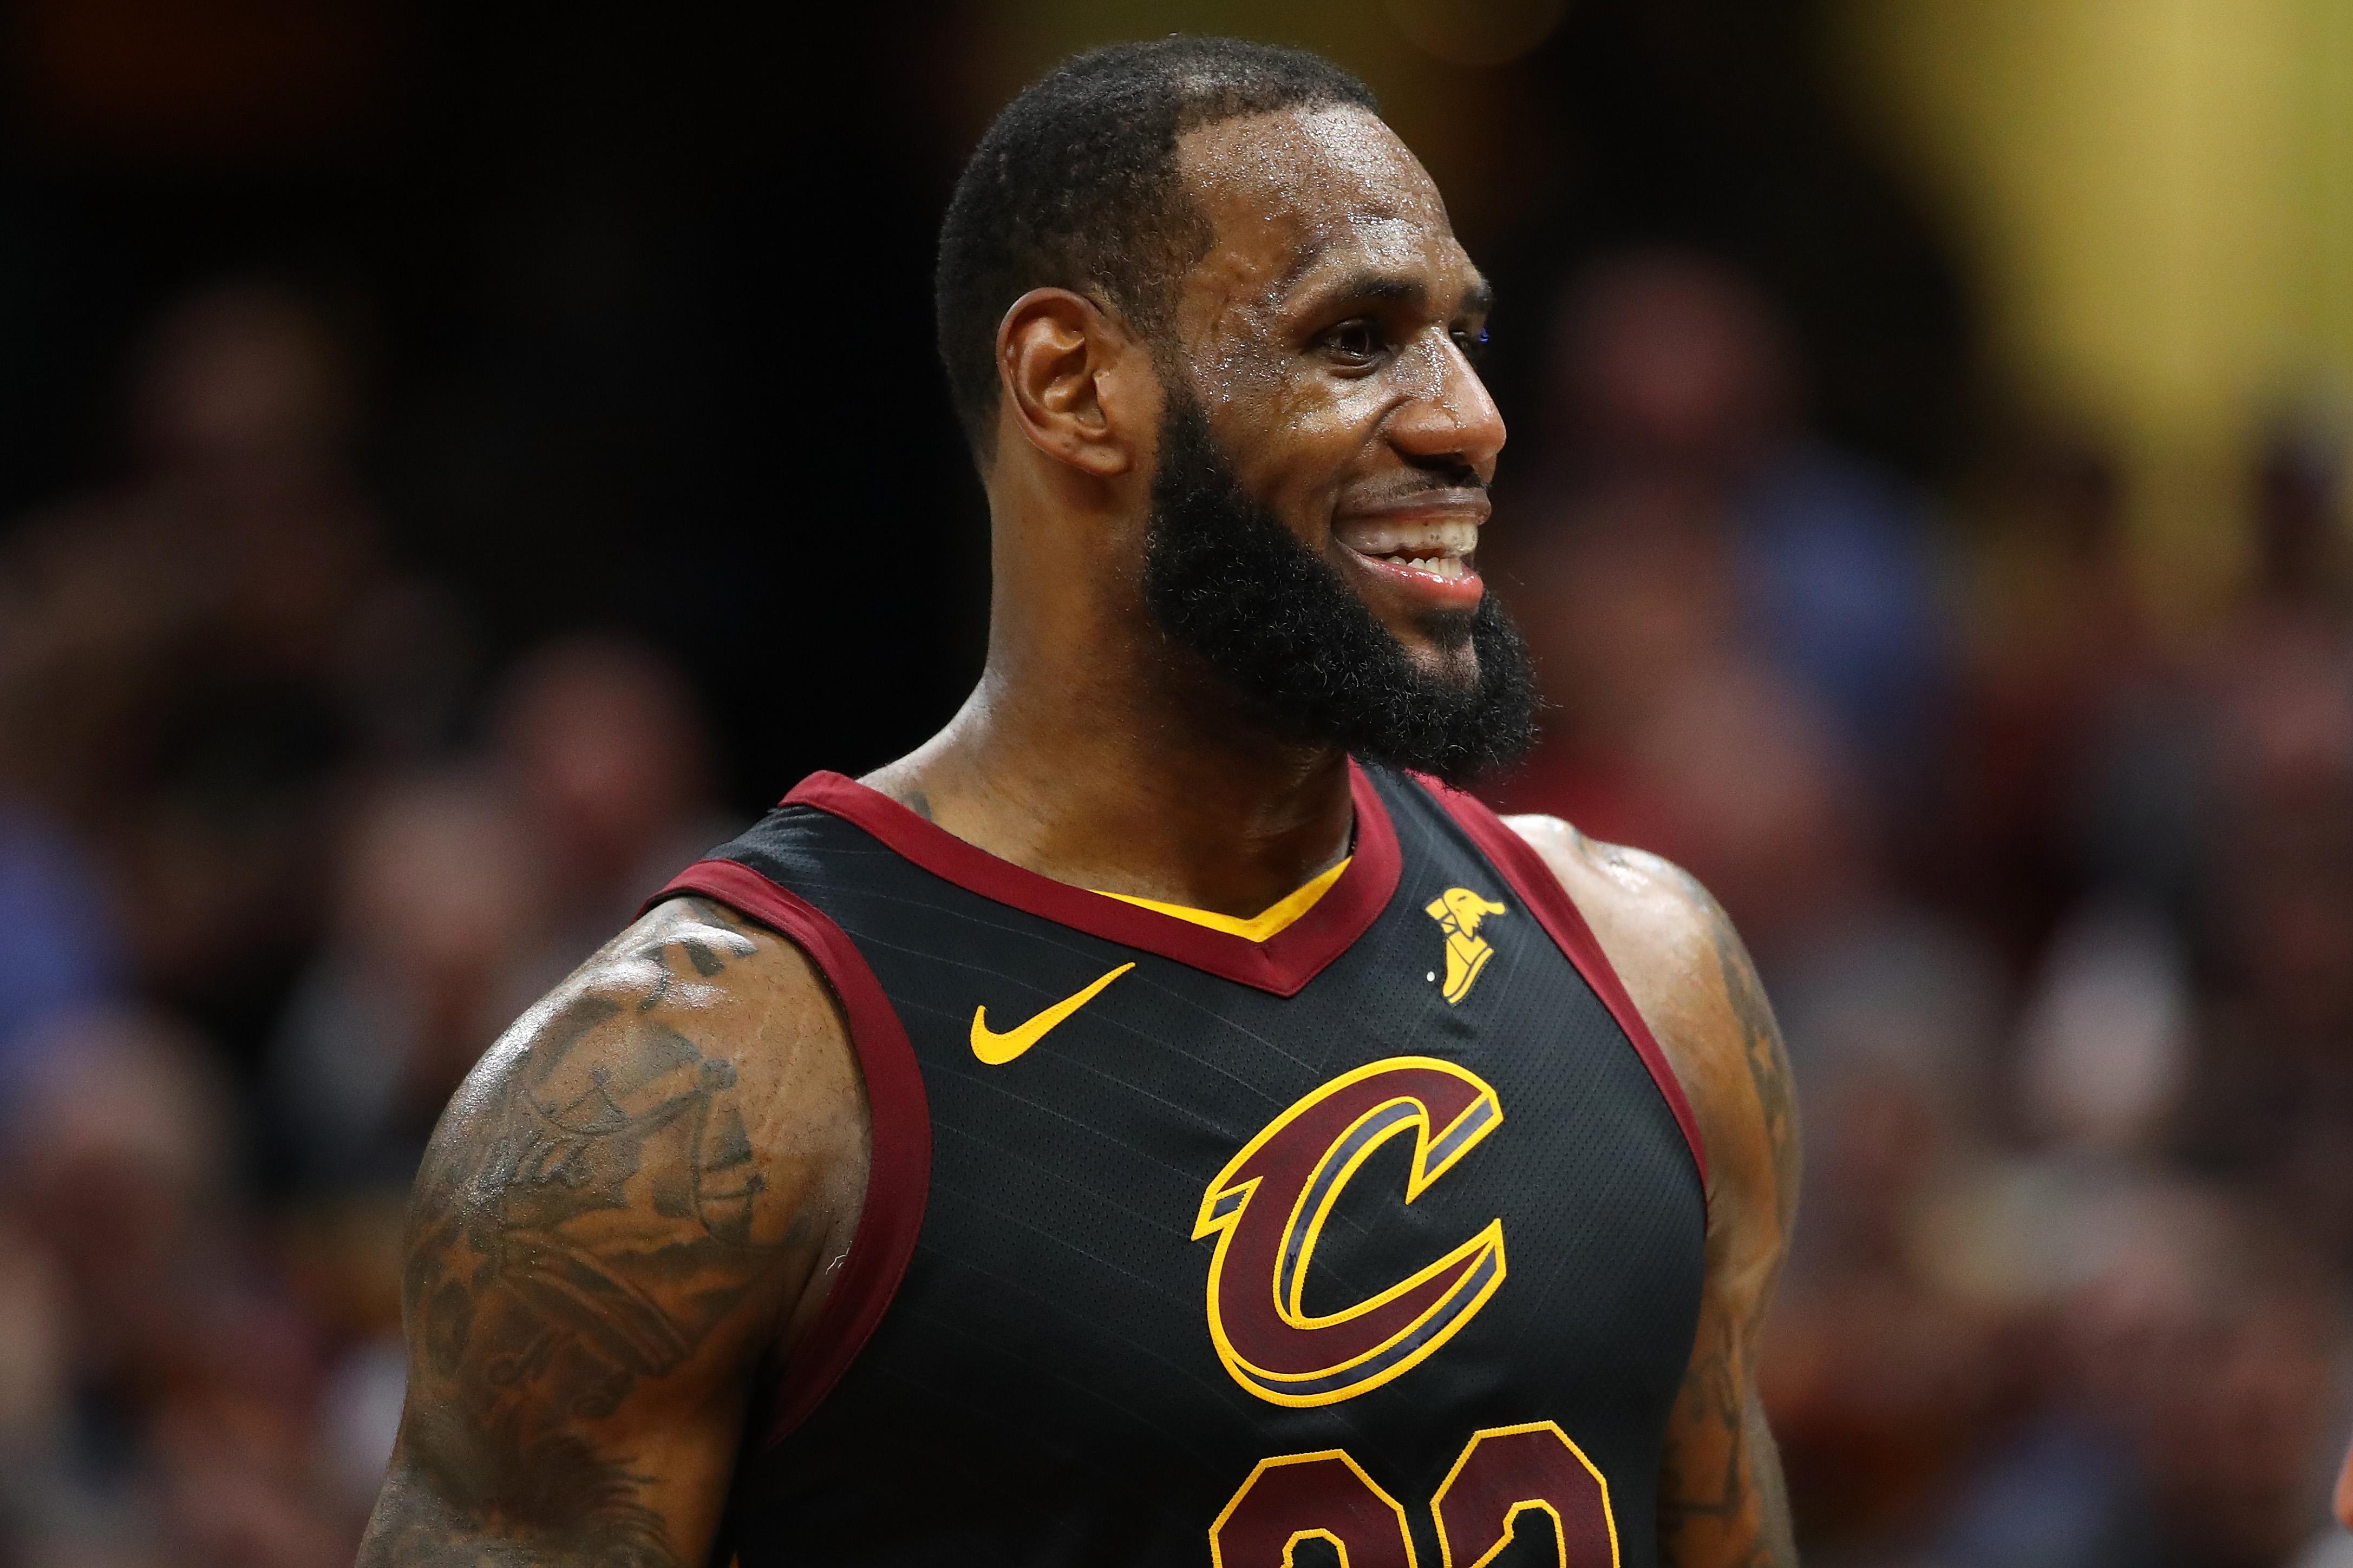 LeBron James May Star in Upcoming Comedy Film